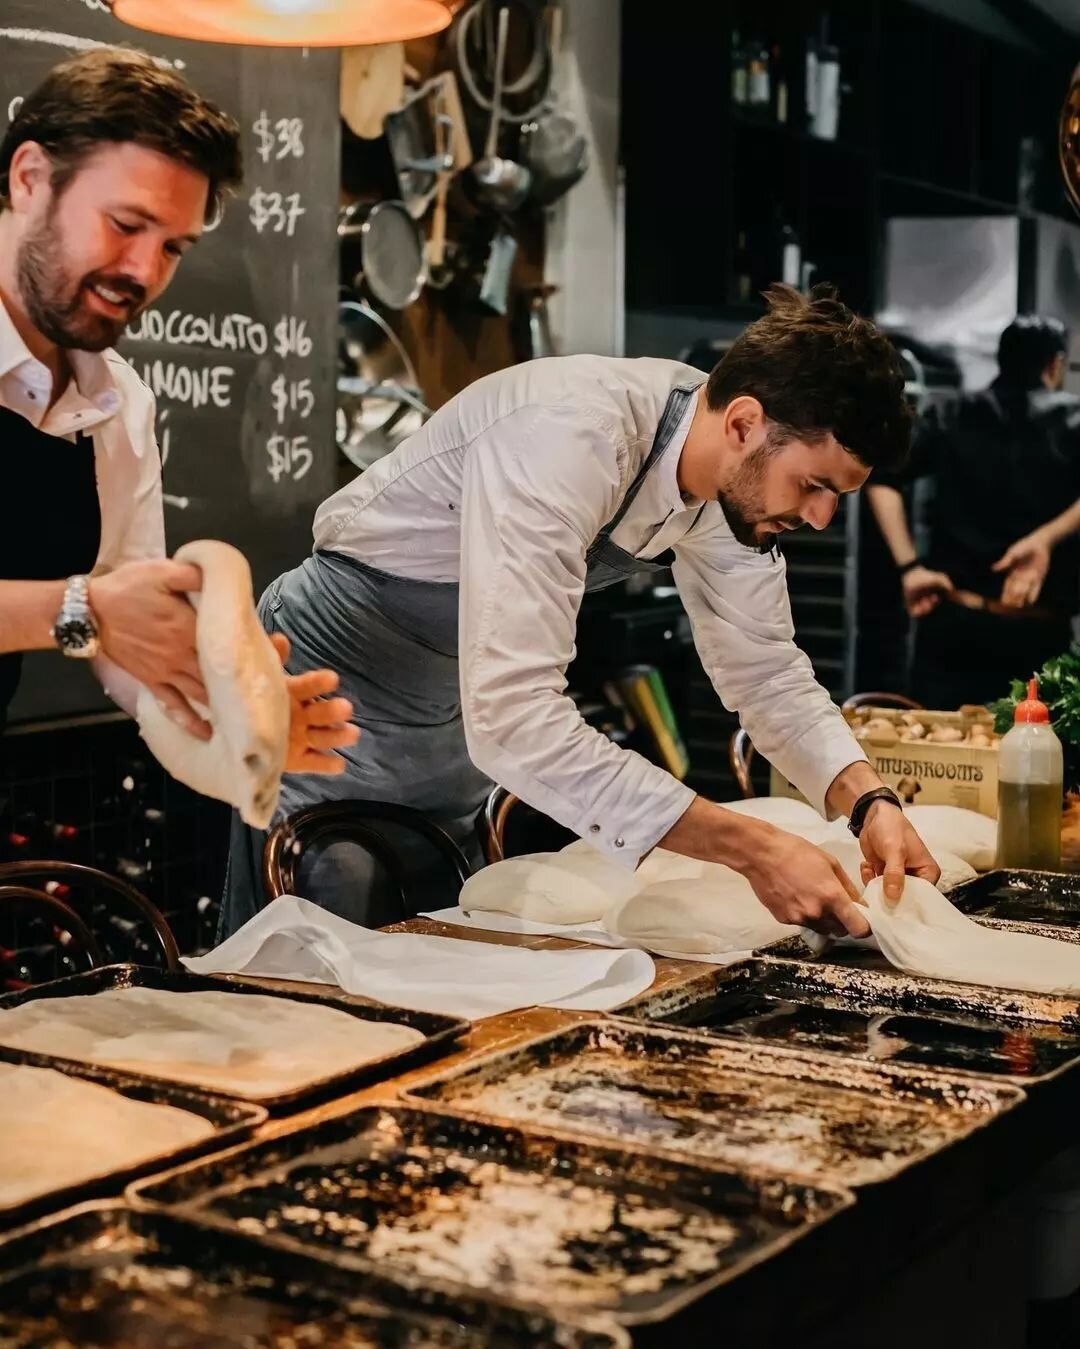 Looking for authenticity?&nbsp; Making things with a nod to tradition has always been at the centre of everything that A Tavola does. Come and try it for yourself.&nbsp;
​
​@atavola&nbsp;👌👌